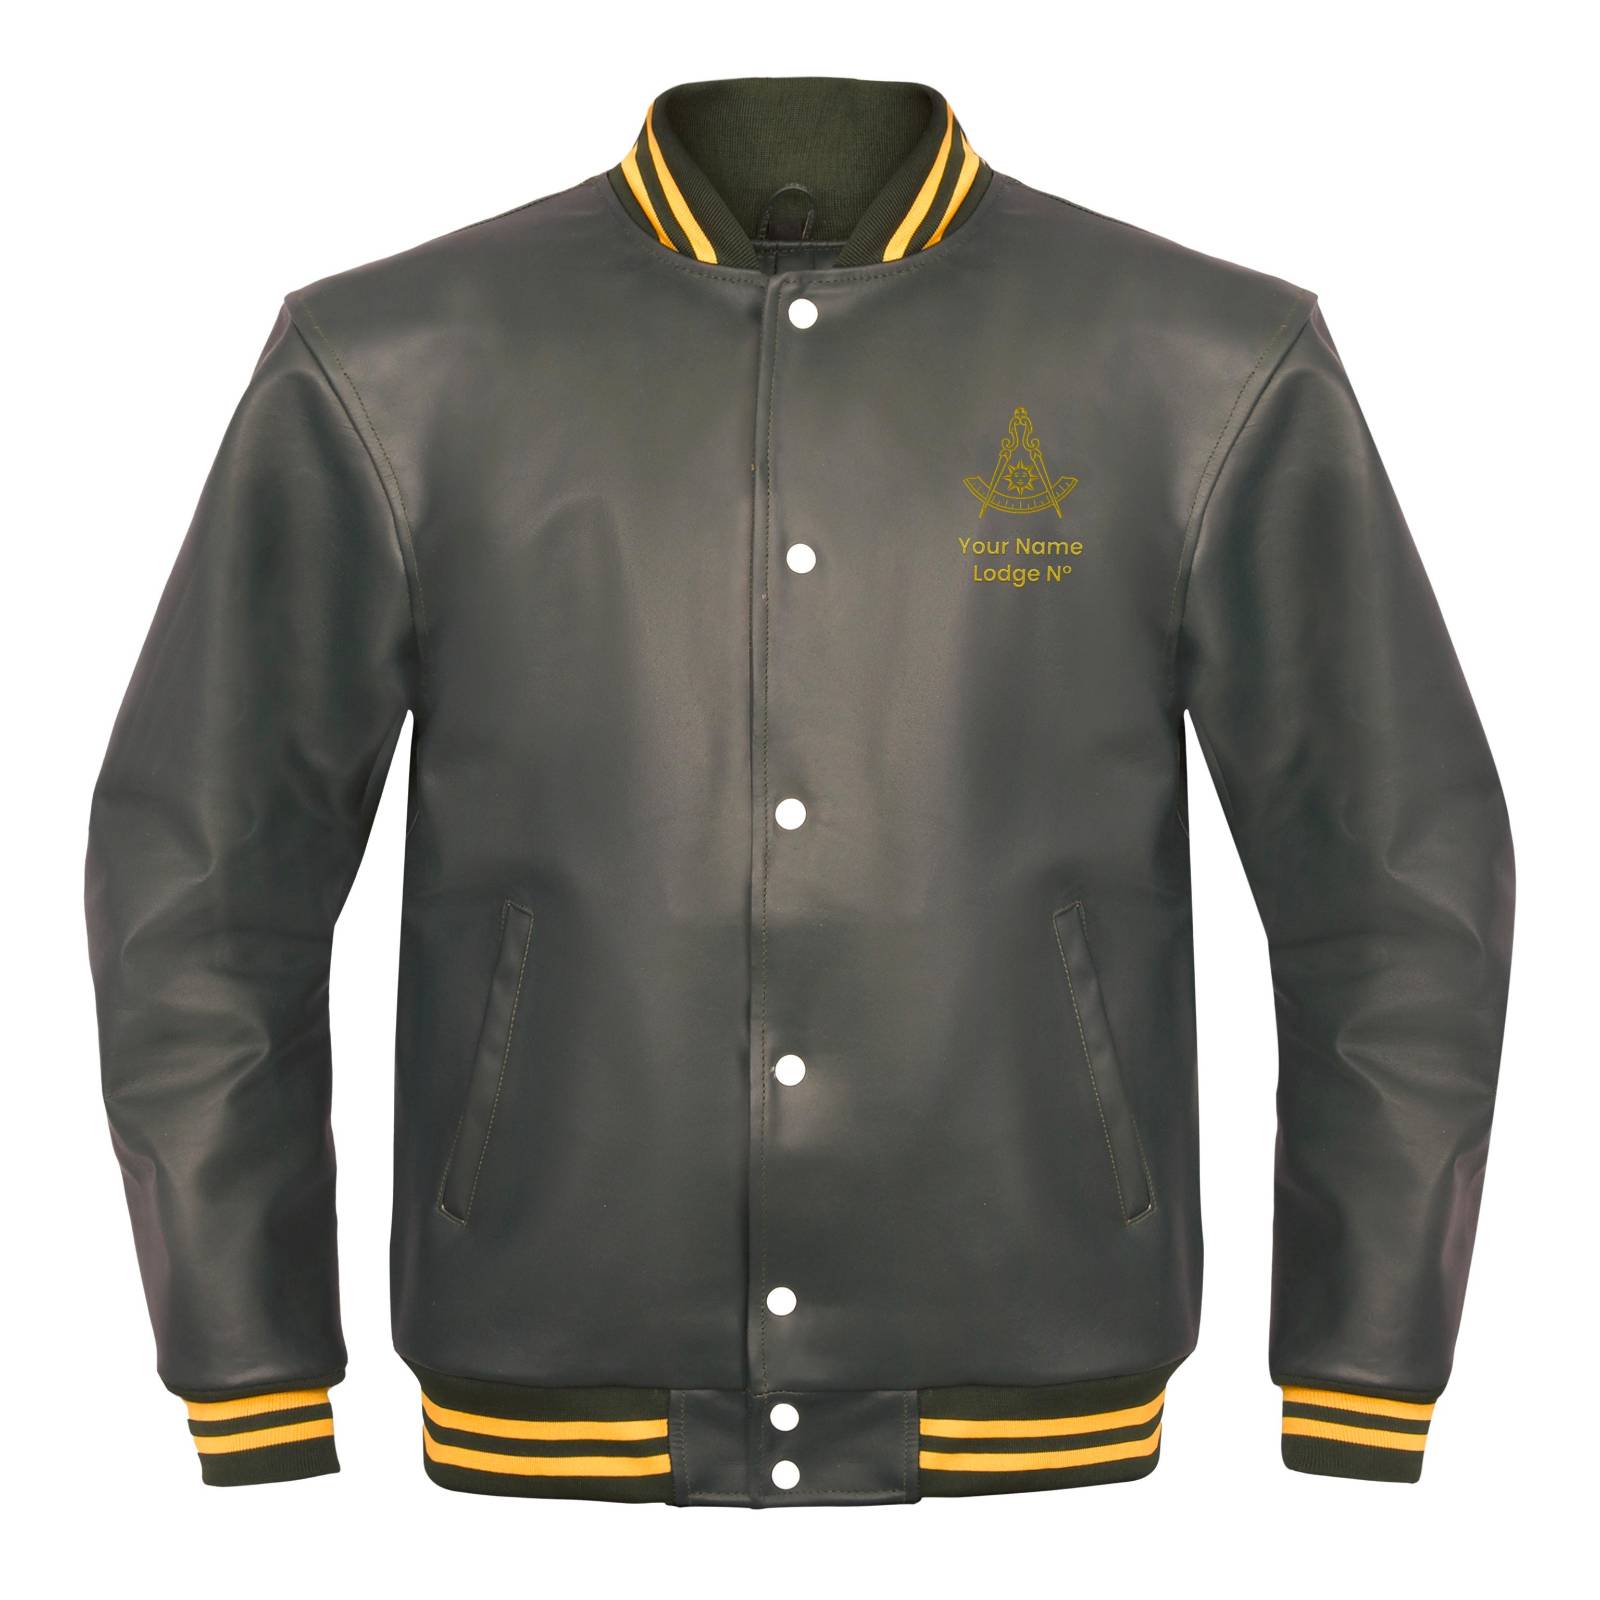 Past Master Blue Lodge California Regulation Jacket - Leather With Customizable Gold Embroidery